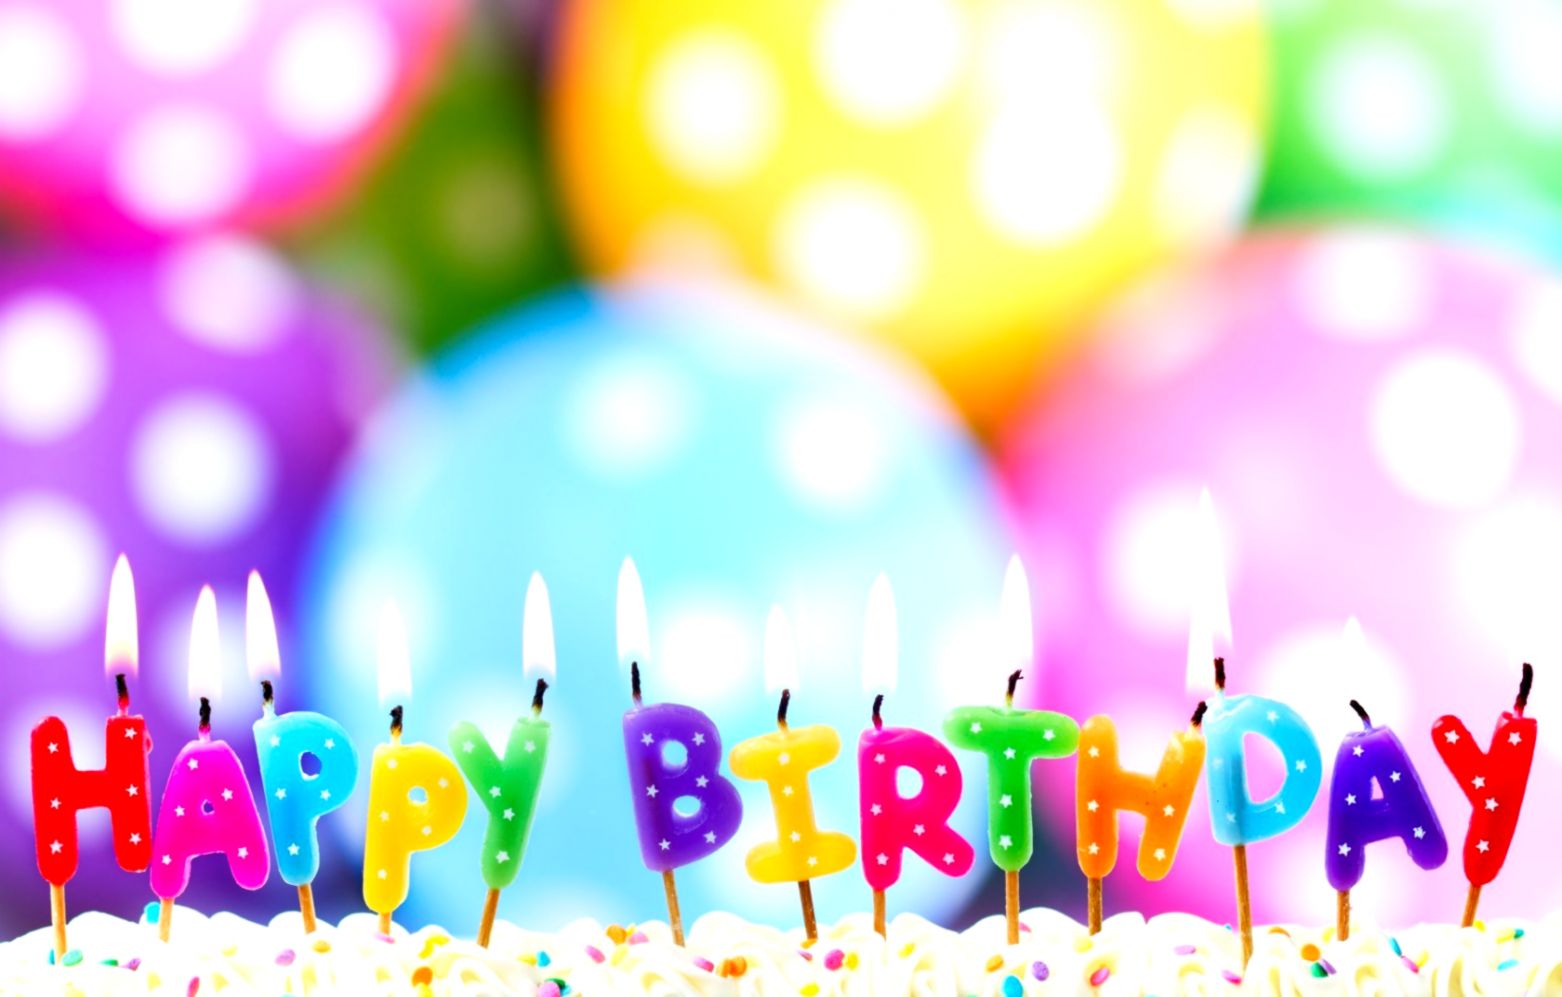 Happy Birthday Candles Hd Background Wallpaper Best Image Background